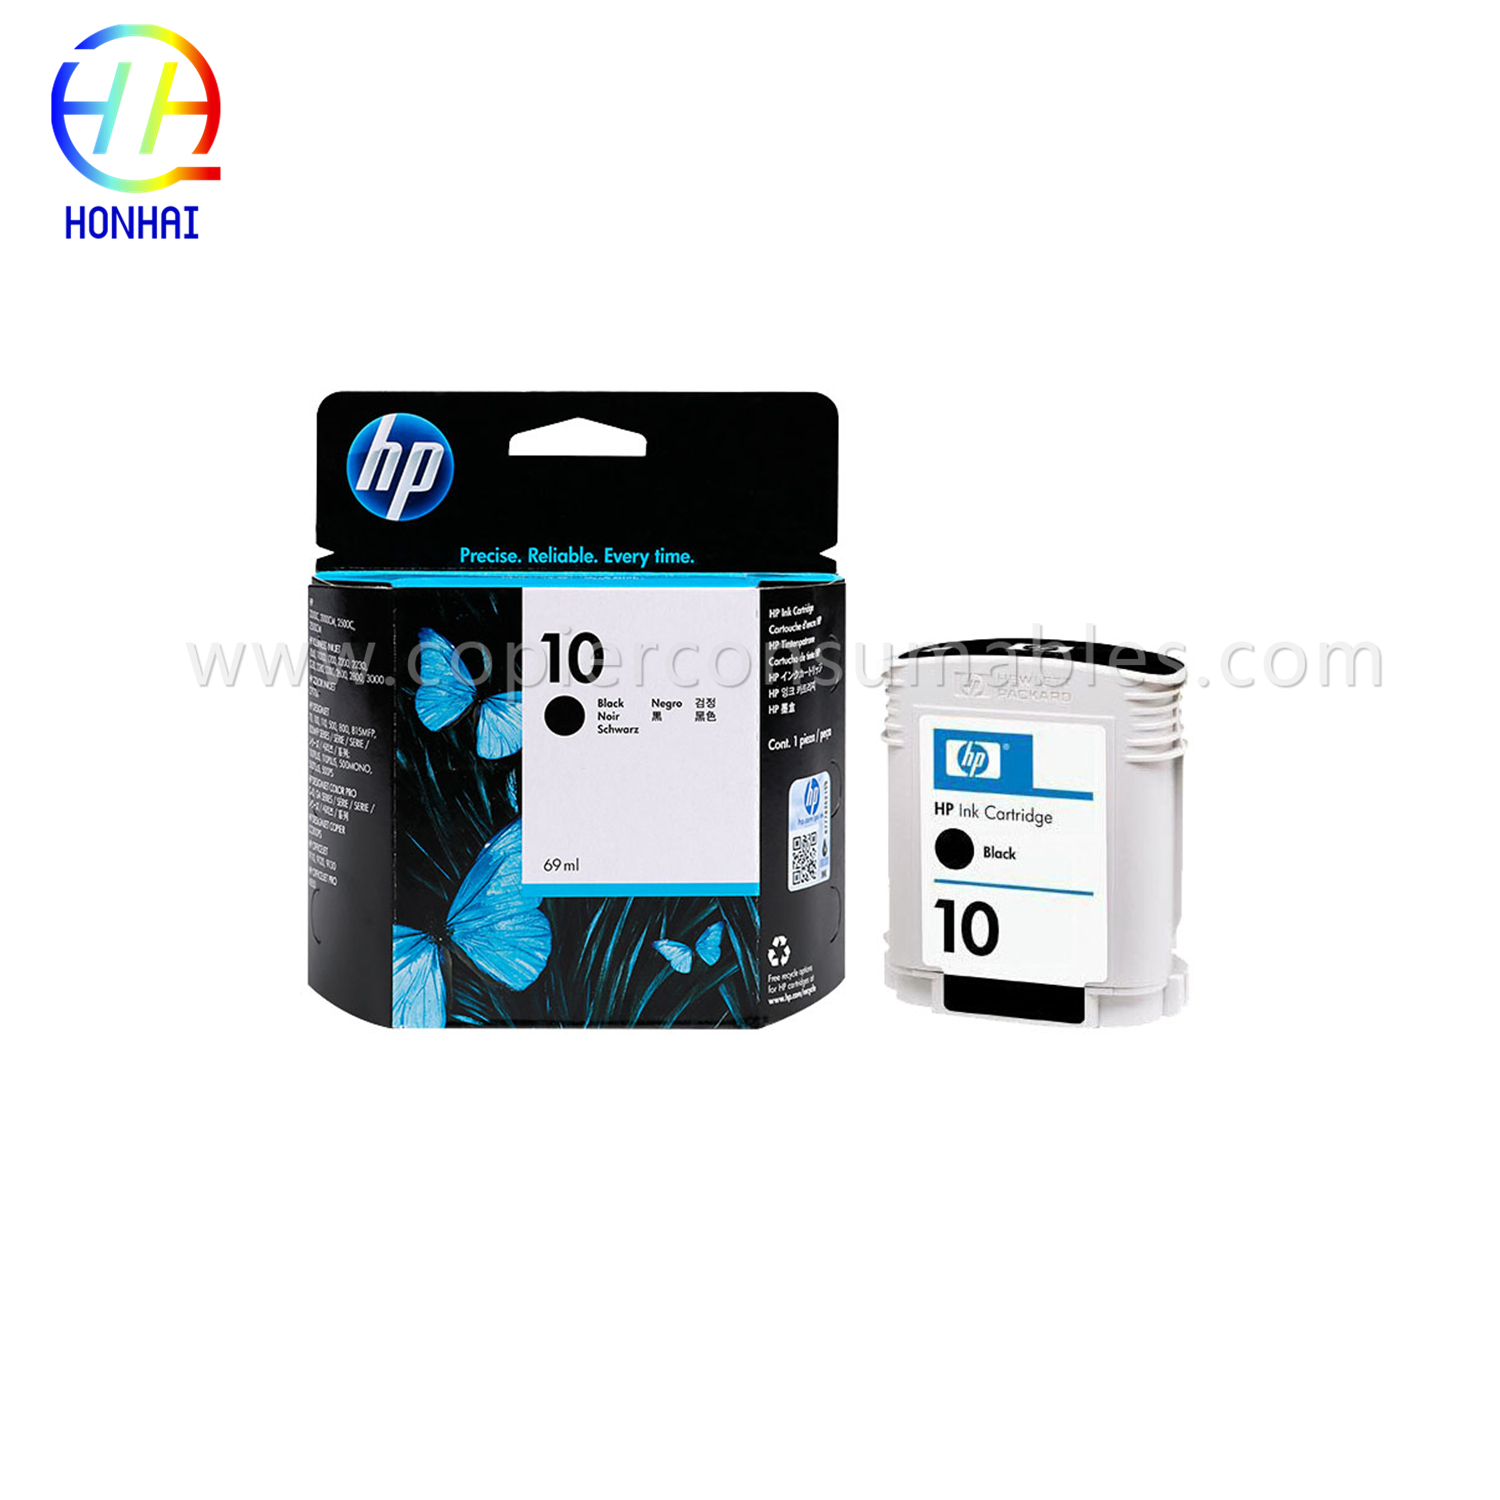 Ink Cartridge for HP 800 500 815 820 9110 9120 9130 (C4844A 10) (1)